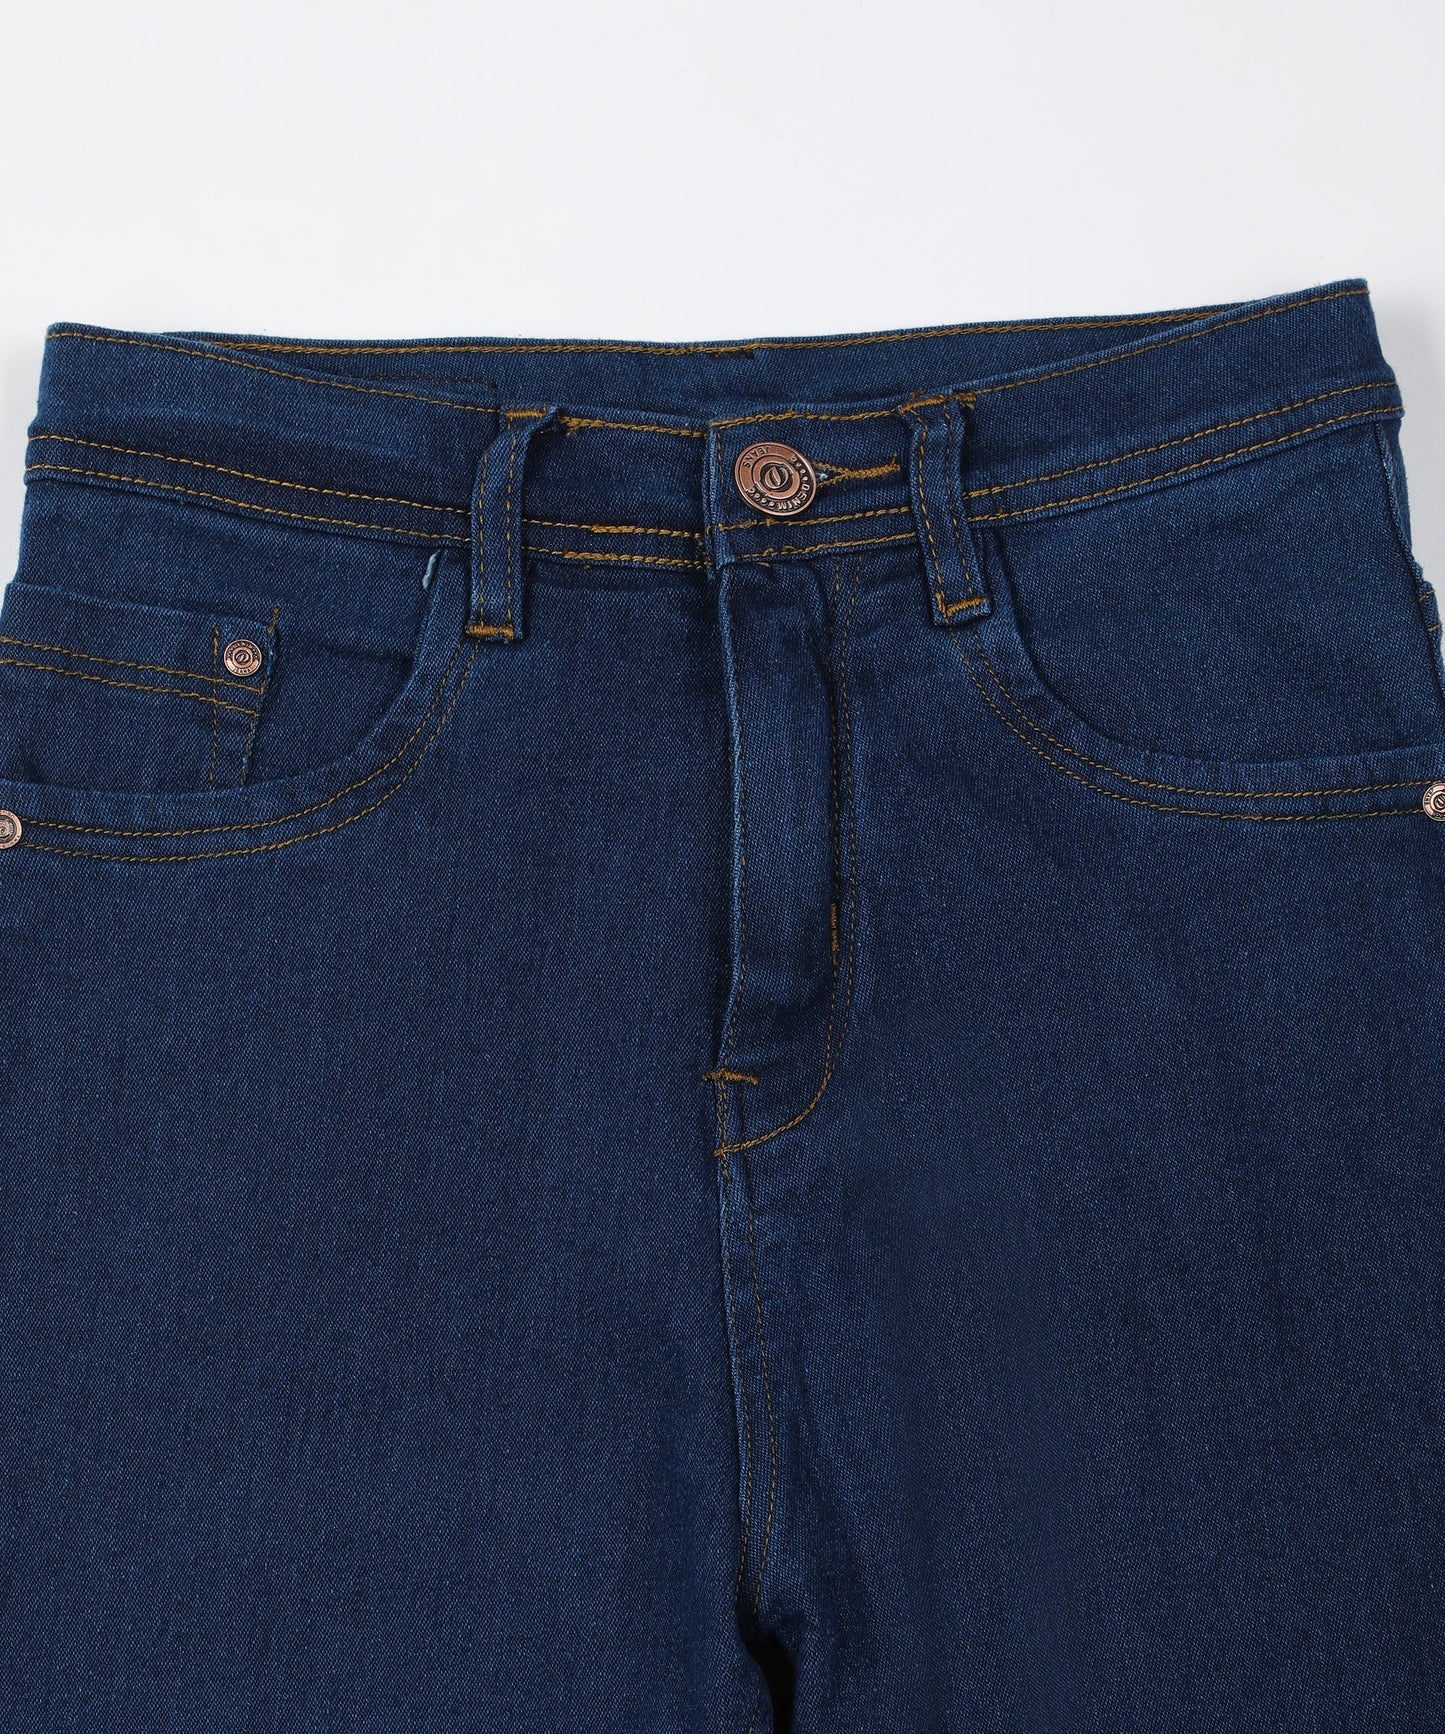 Bata Blue straight fit 5- pocket high rise jeans, clean look, zip fly with button closure, waistband with belt loops